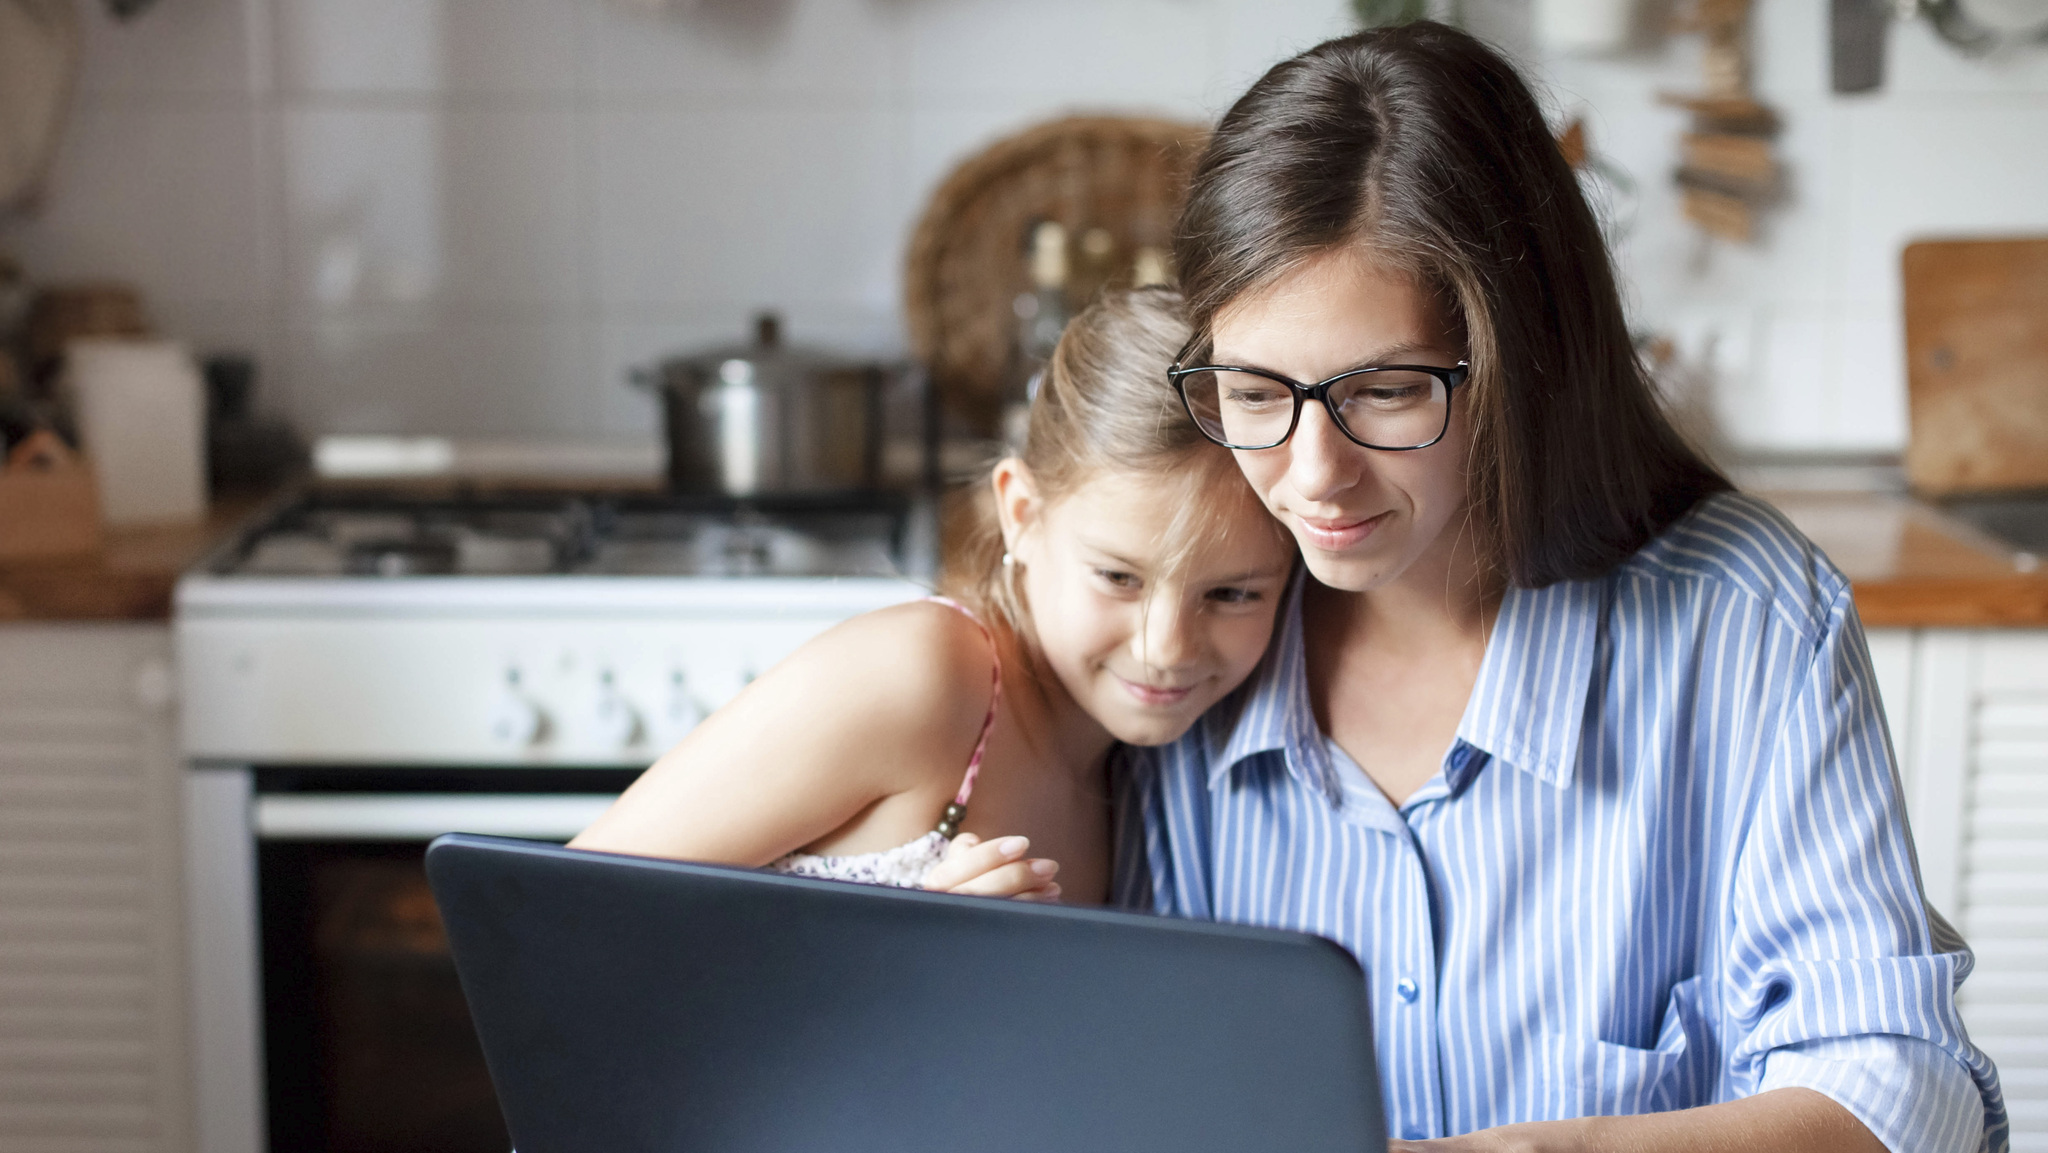 mother and daughter looking at laptop in the kitchen 